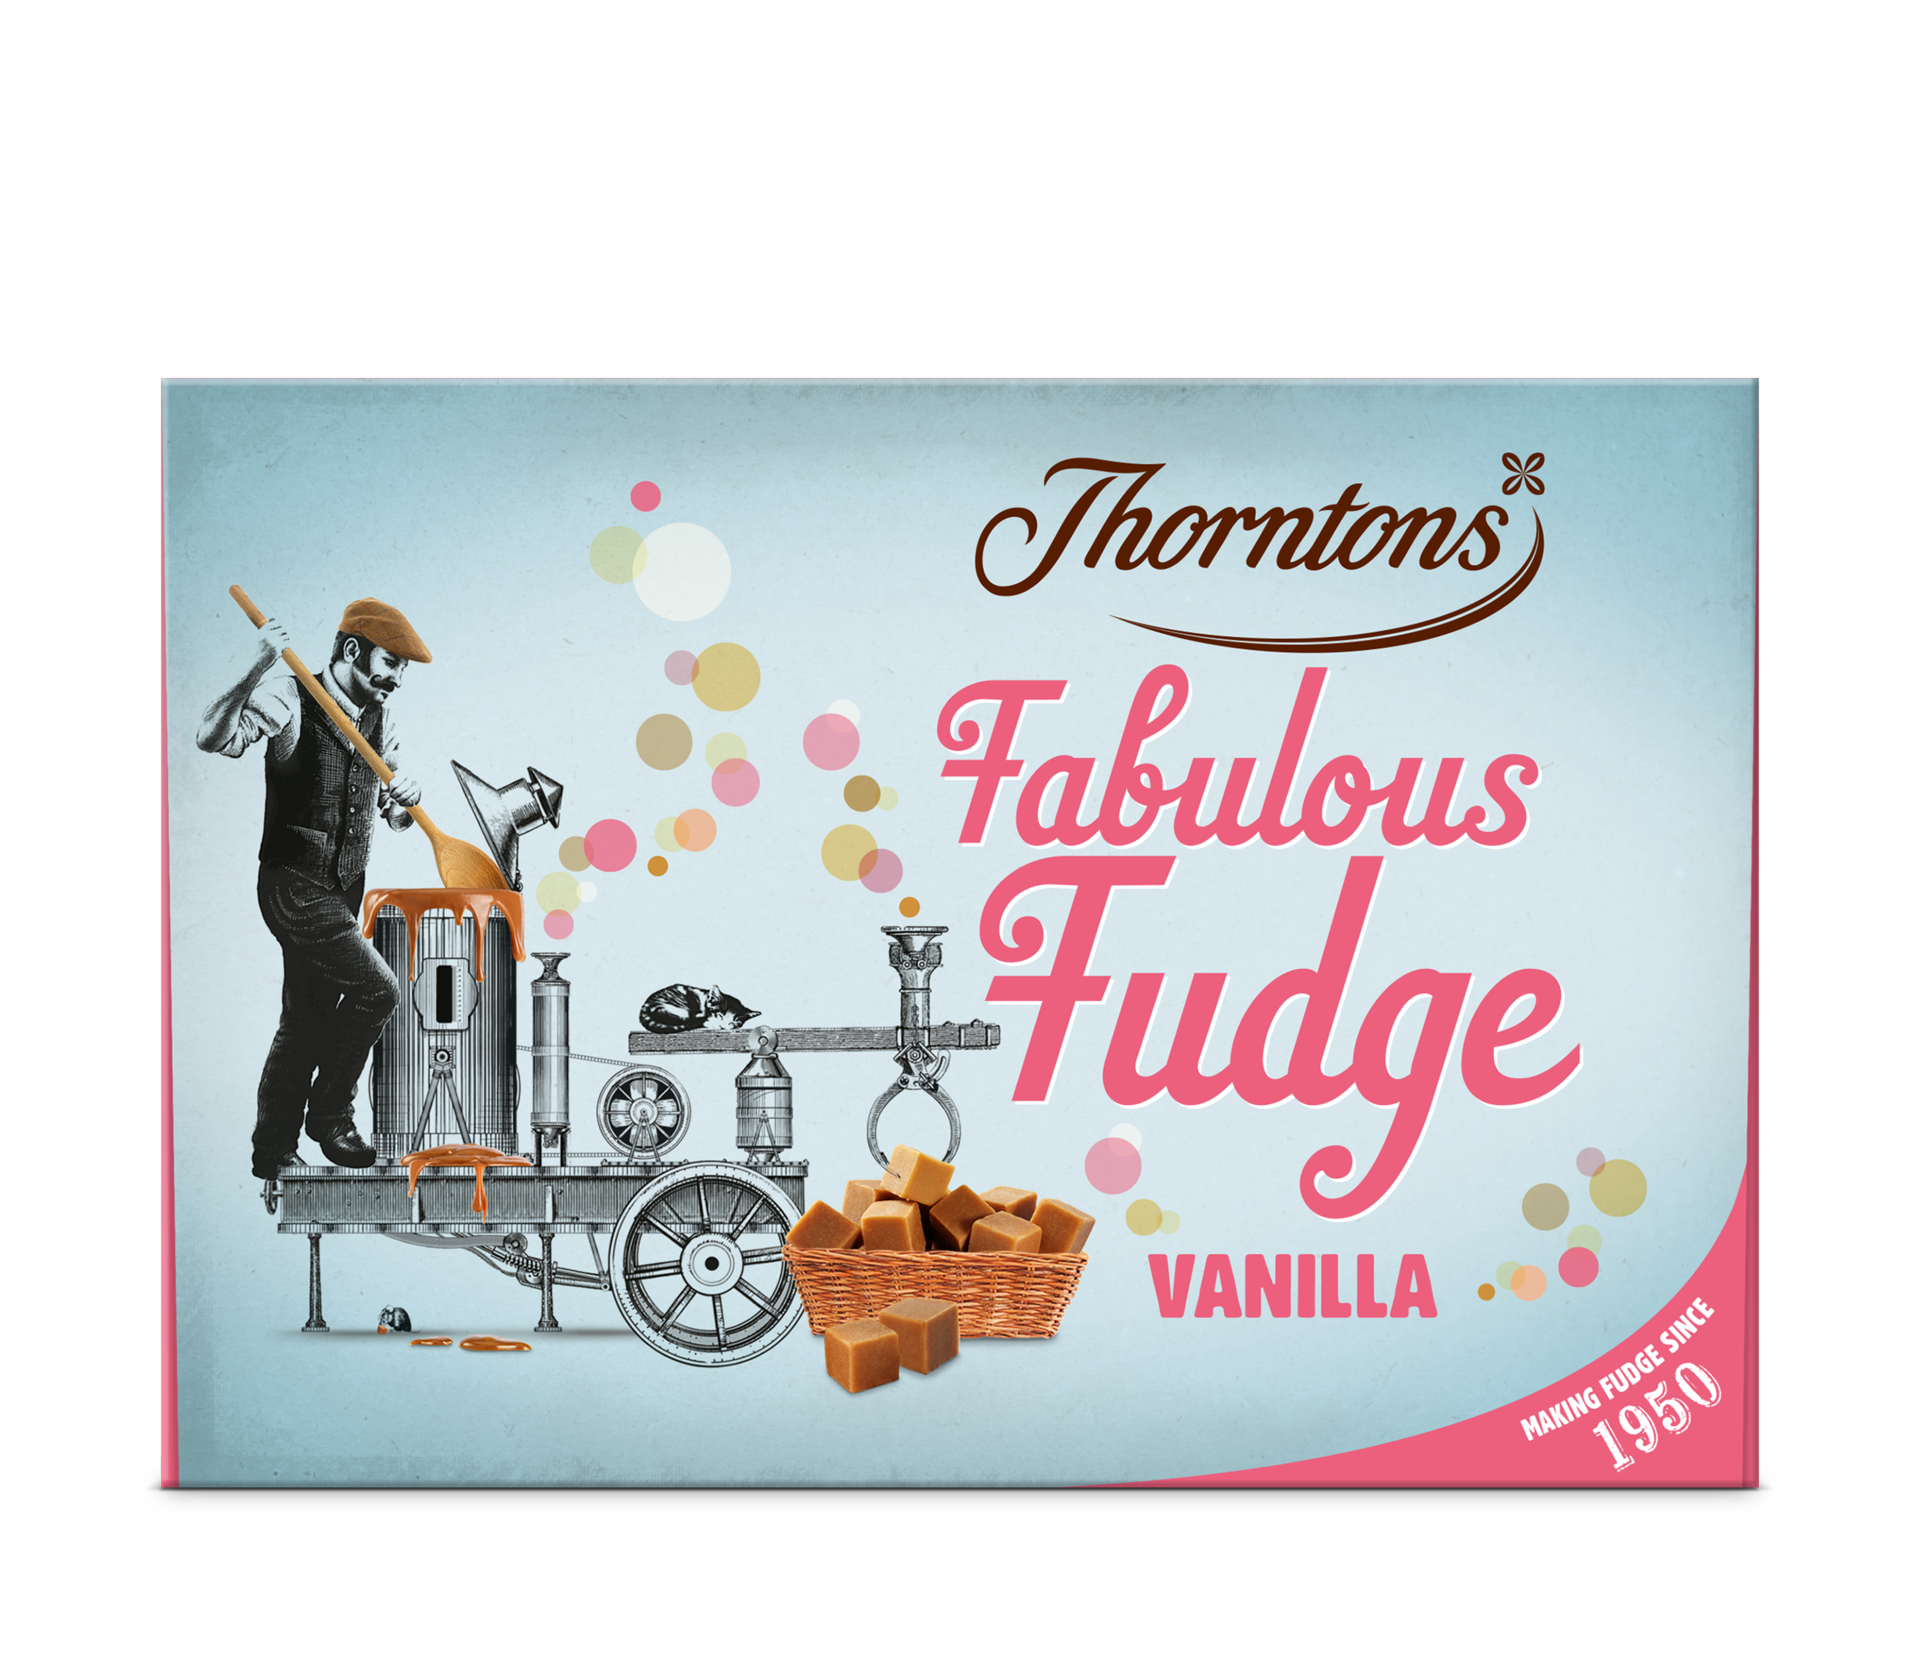 https://www.thorntons.com/medias/sys_master/images/h83/h5b/8916766130206/77230996_main/77230996-main.png?resize=ProductGridComponent